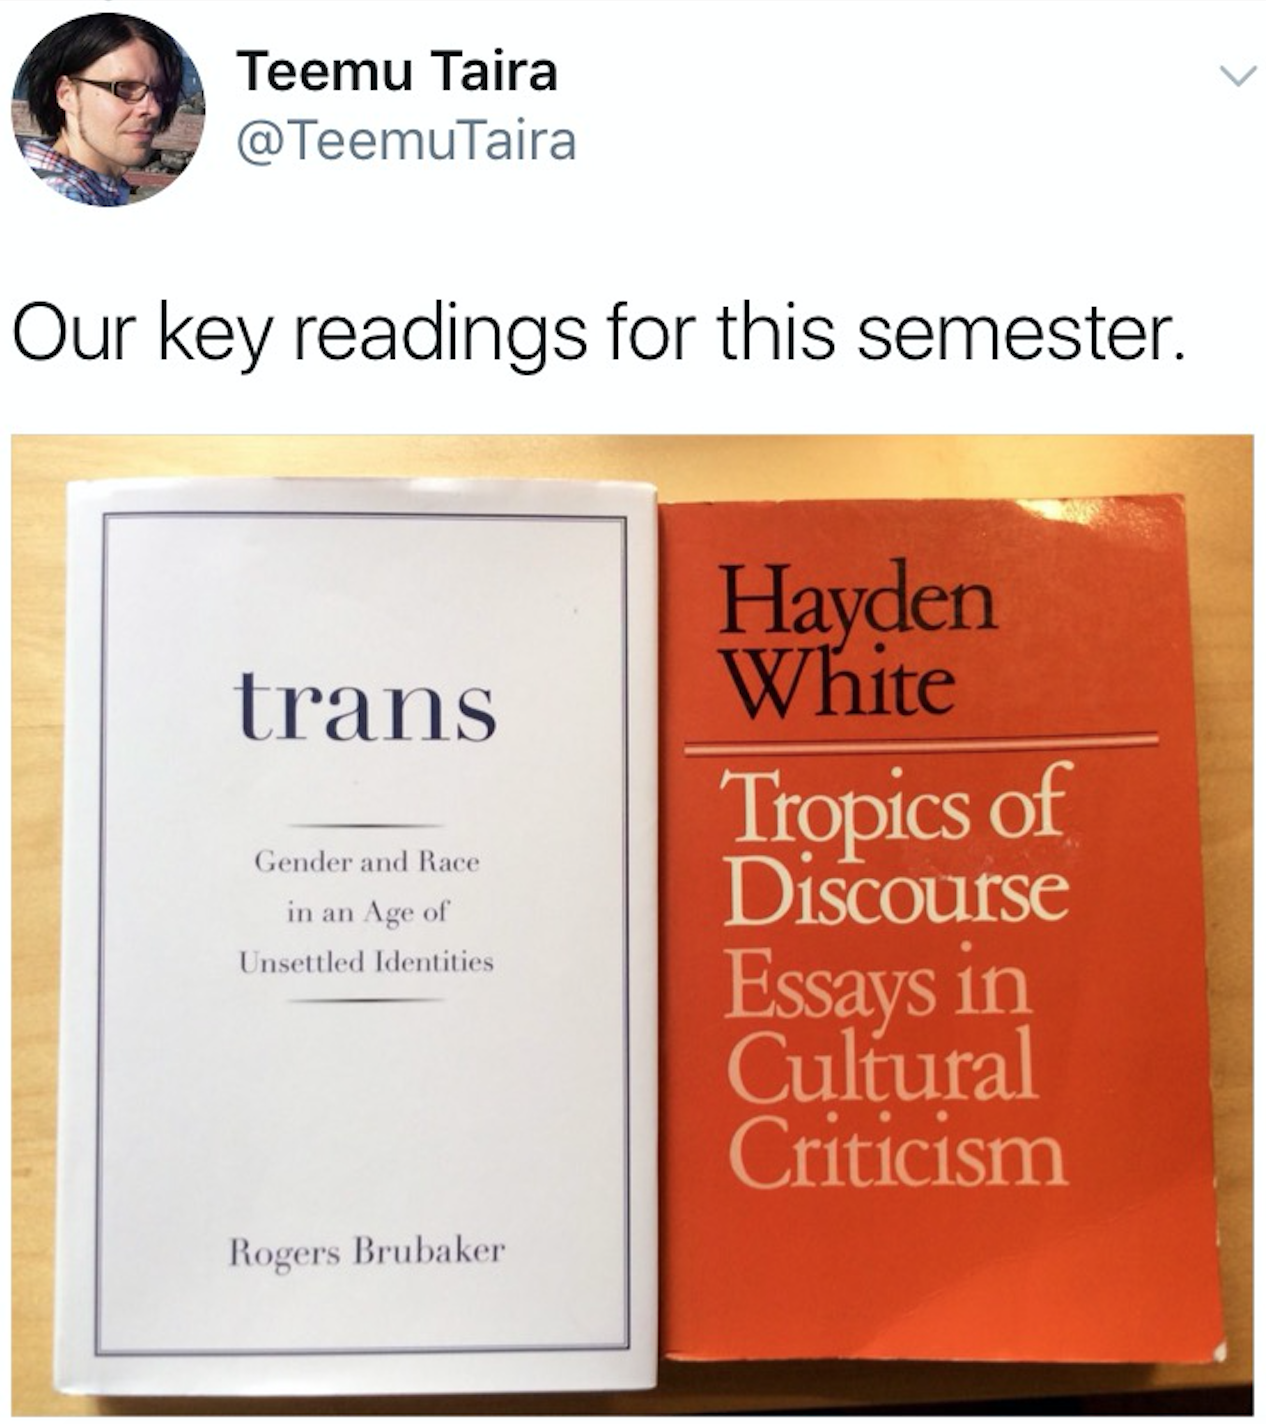 An image of Temmu Taira about the readings for a semester